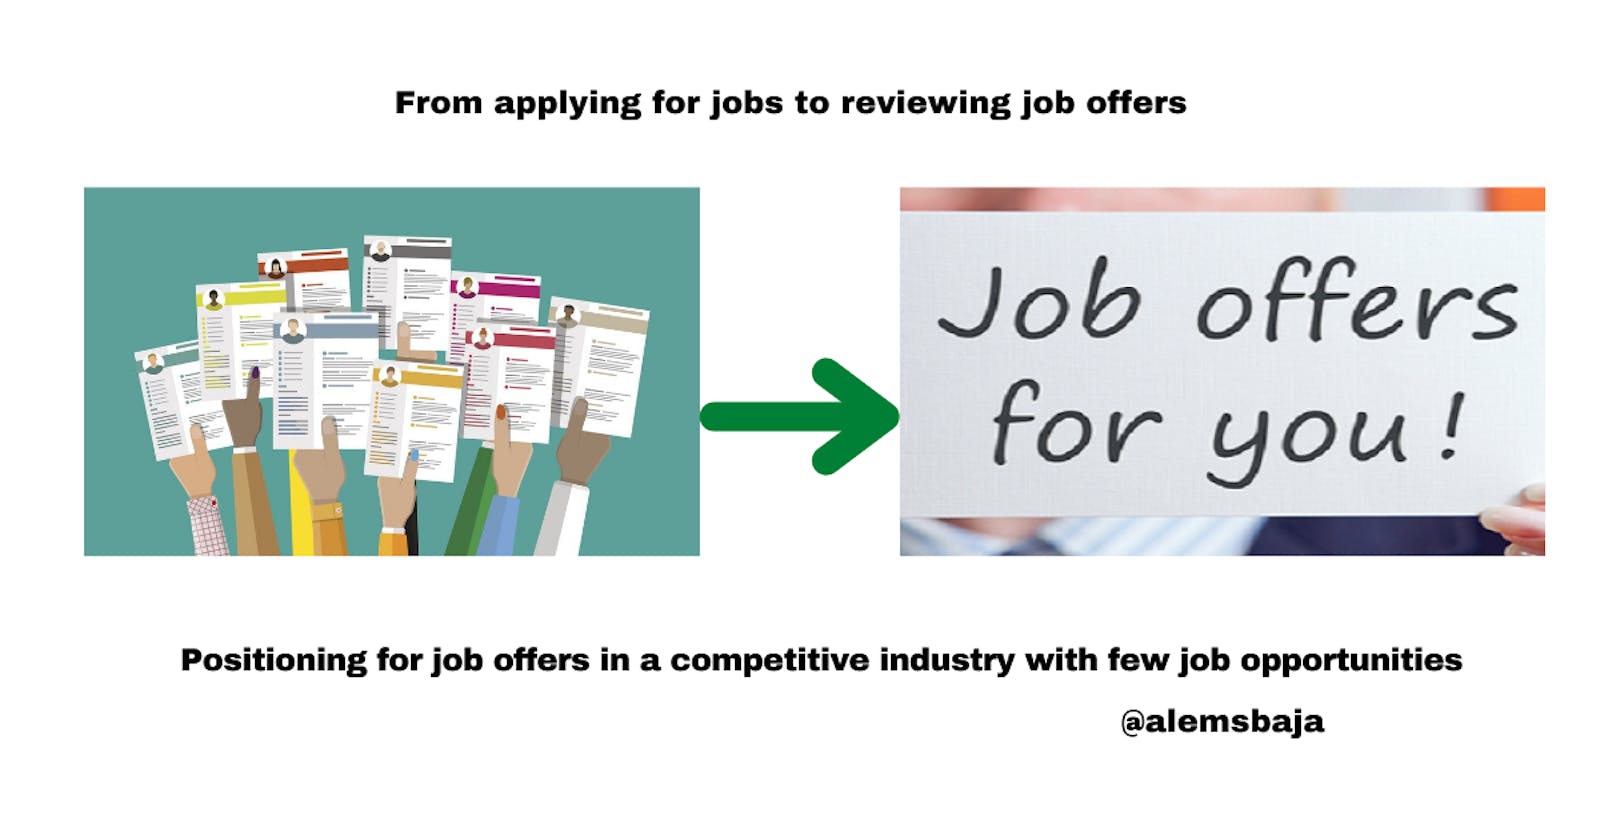 From applying for jobs to reviewing job offers